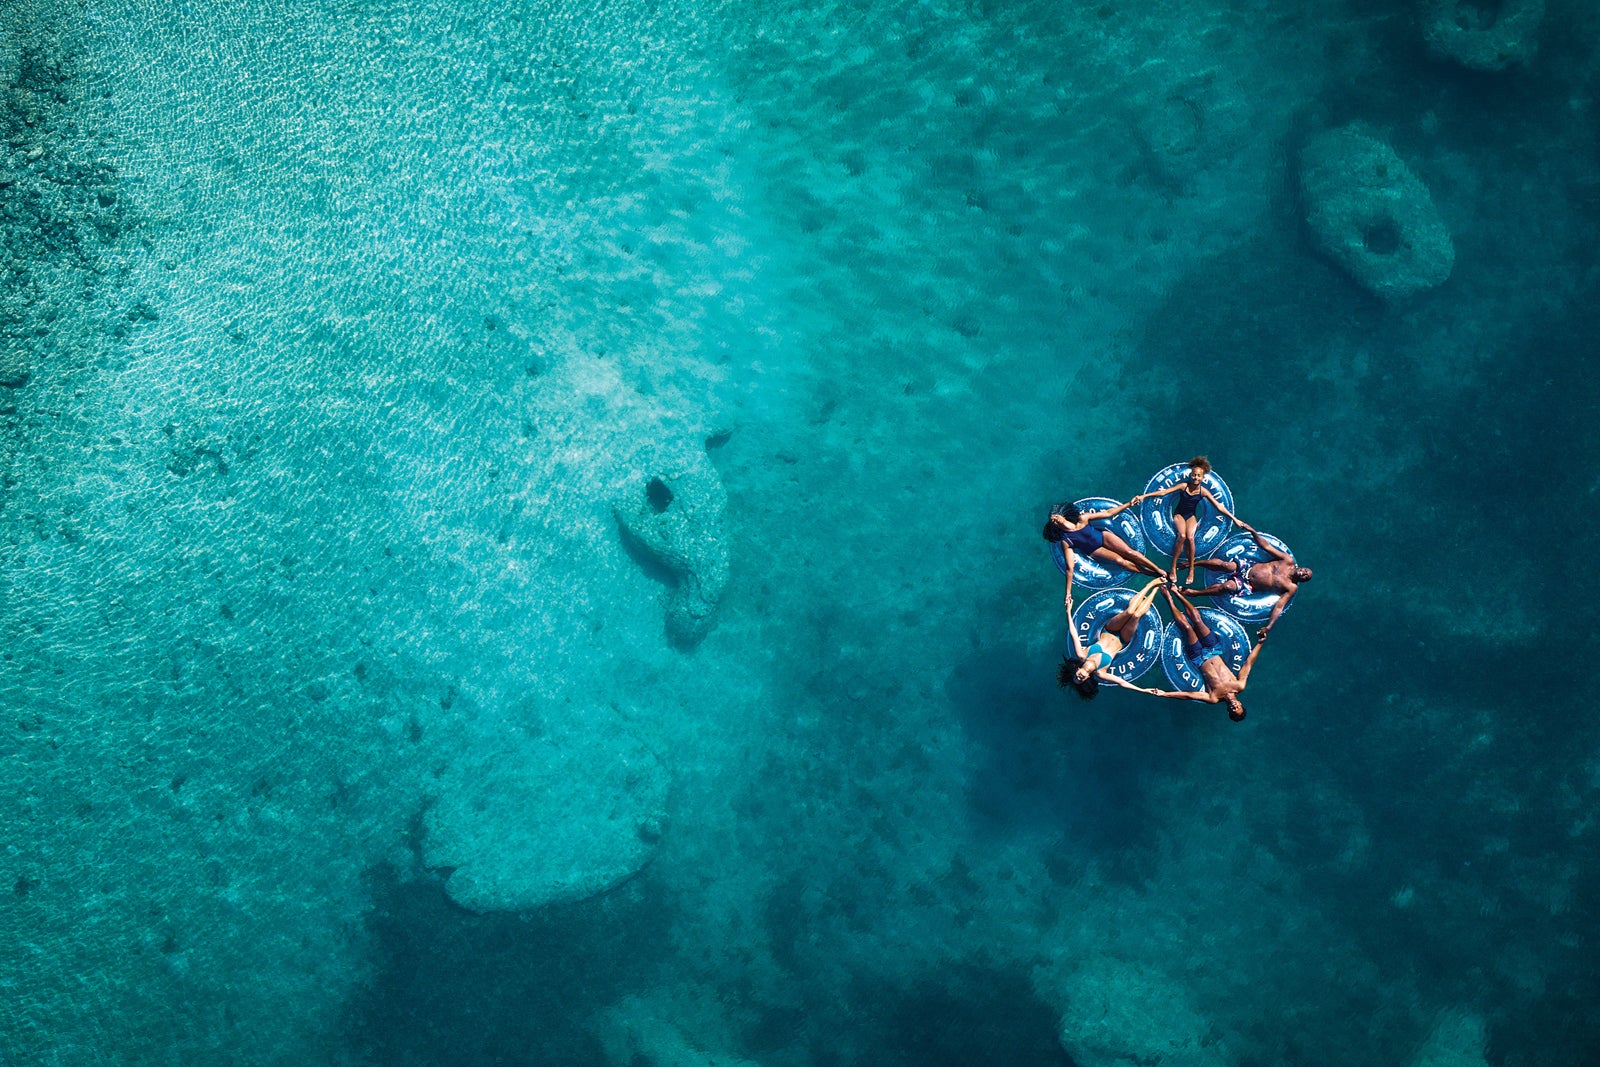 Family of 5 enjoying a relaxing while laying on a tube in the ocean. Blue green water surrounds them.